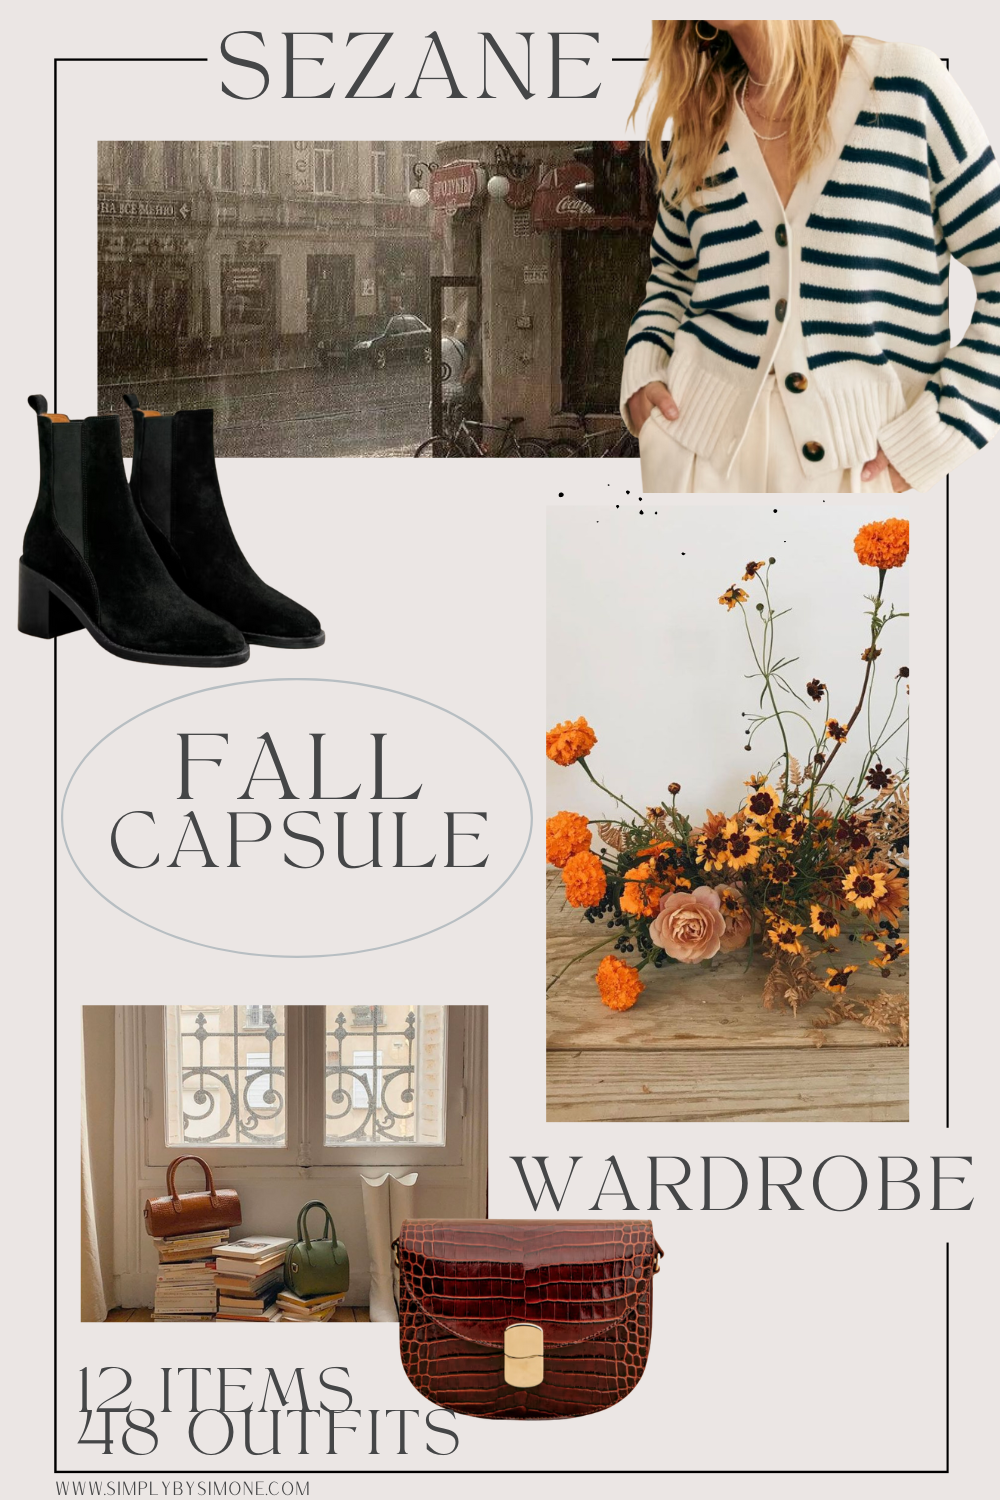 Affordable Sezane Fall Capsule Wardrobe | 12 Pieces, 48 Outfits | How to Build a Capsule Wardrobe | Sezane Fall Clothes | Outfit Inspiration | 48 Fall Weather Outfit Ideas | Fall Vacation Packing Guide | Sezane Fall Capsule Wardrobe - What To Wear This Fall 2022, Parisian Outfit Ideas | Cover Image | Simply by Simone